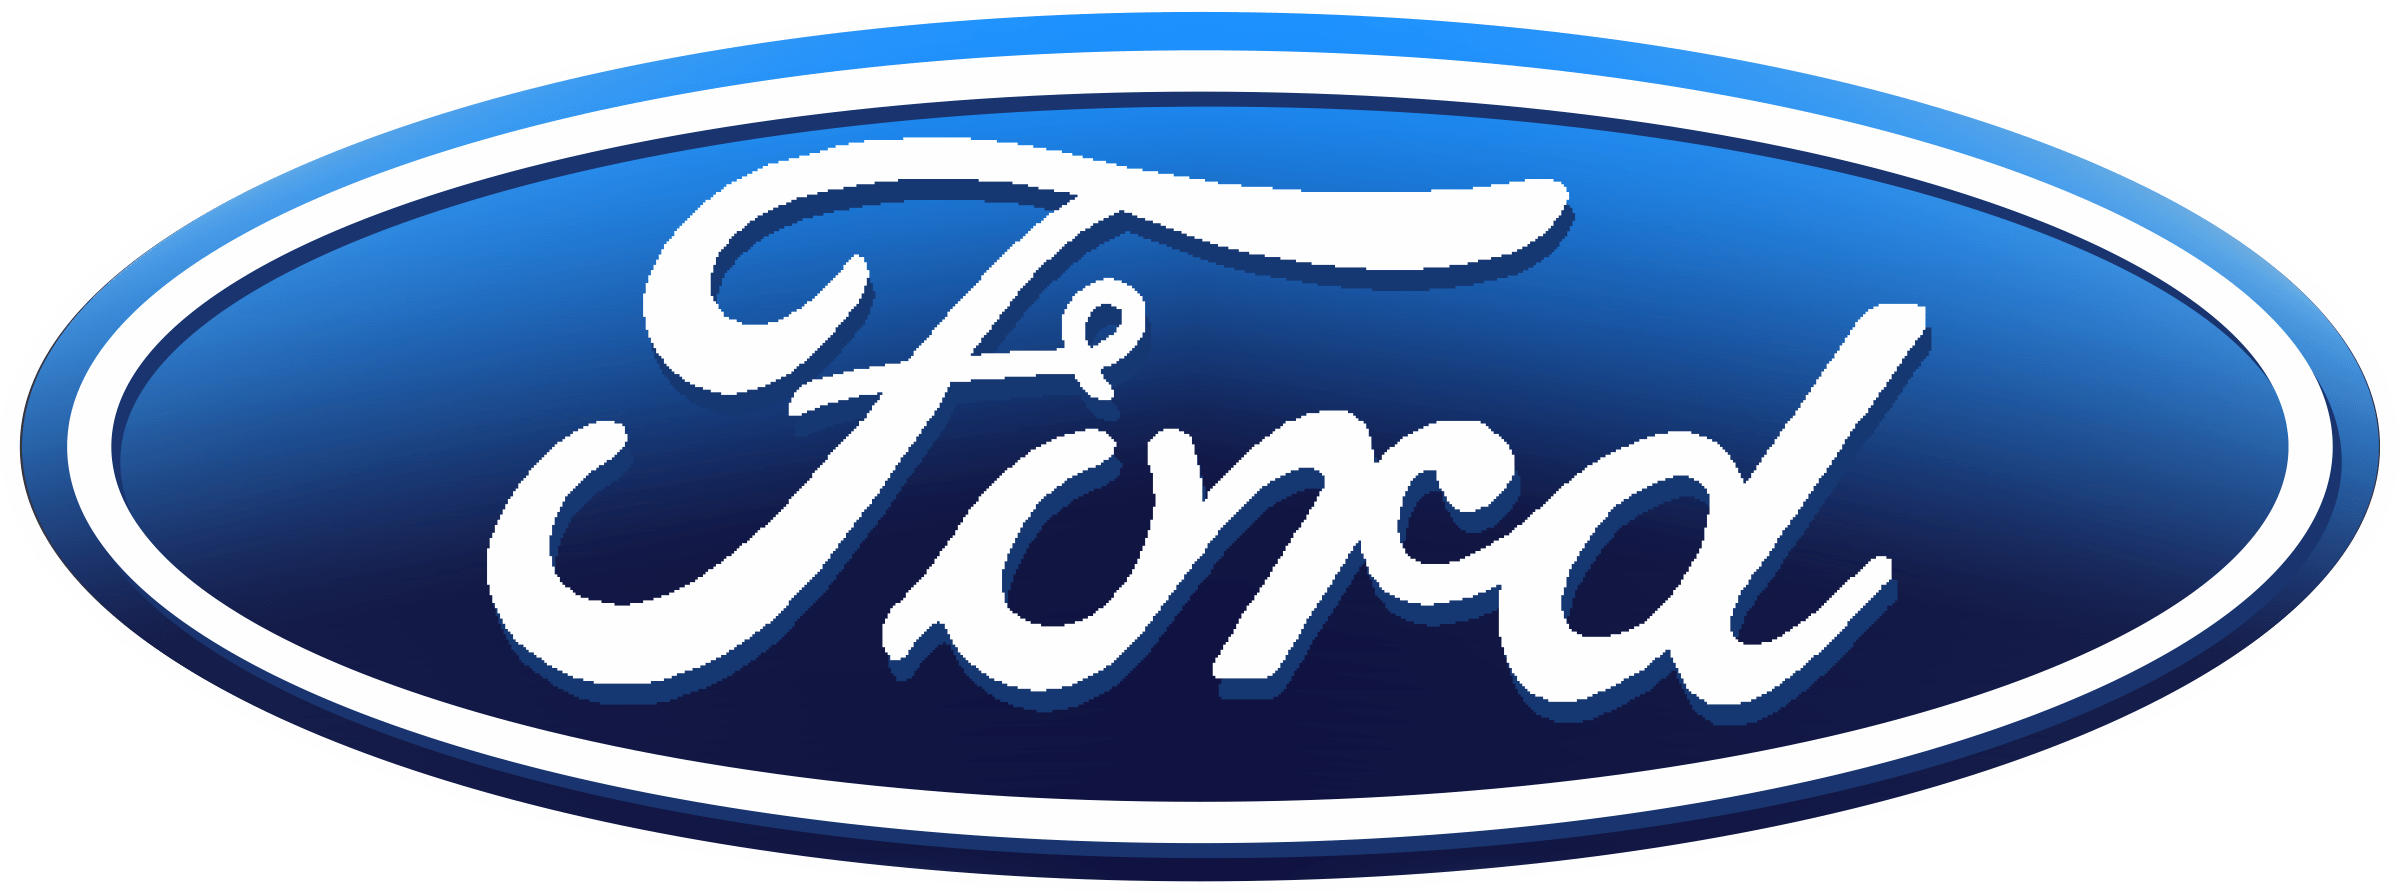 Cool New Ford Logo - Cool Fords Logo Png Image